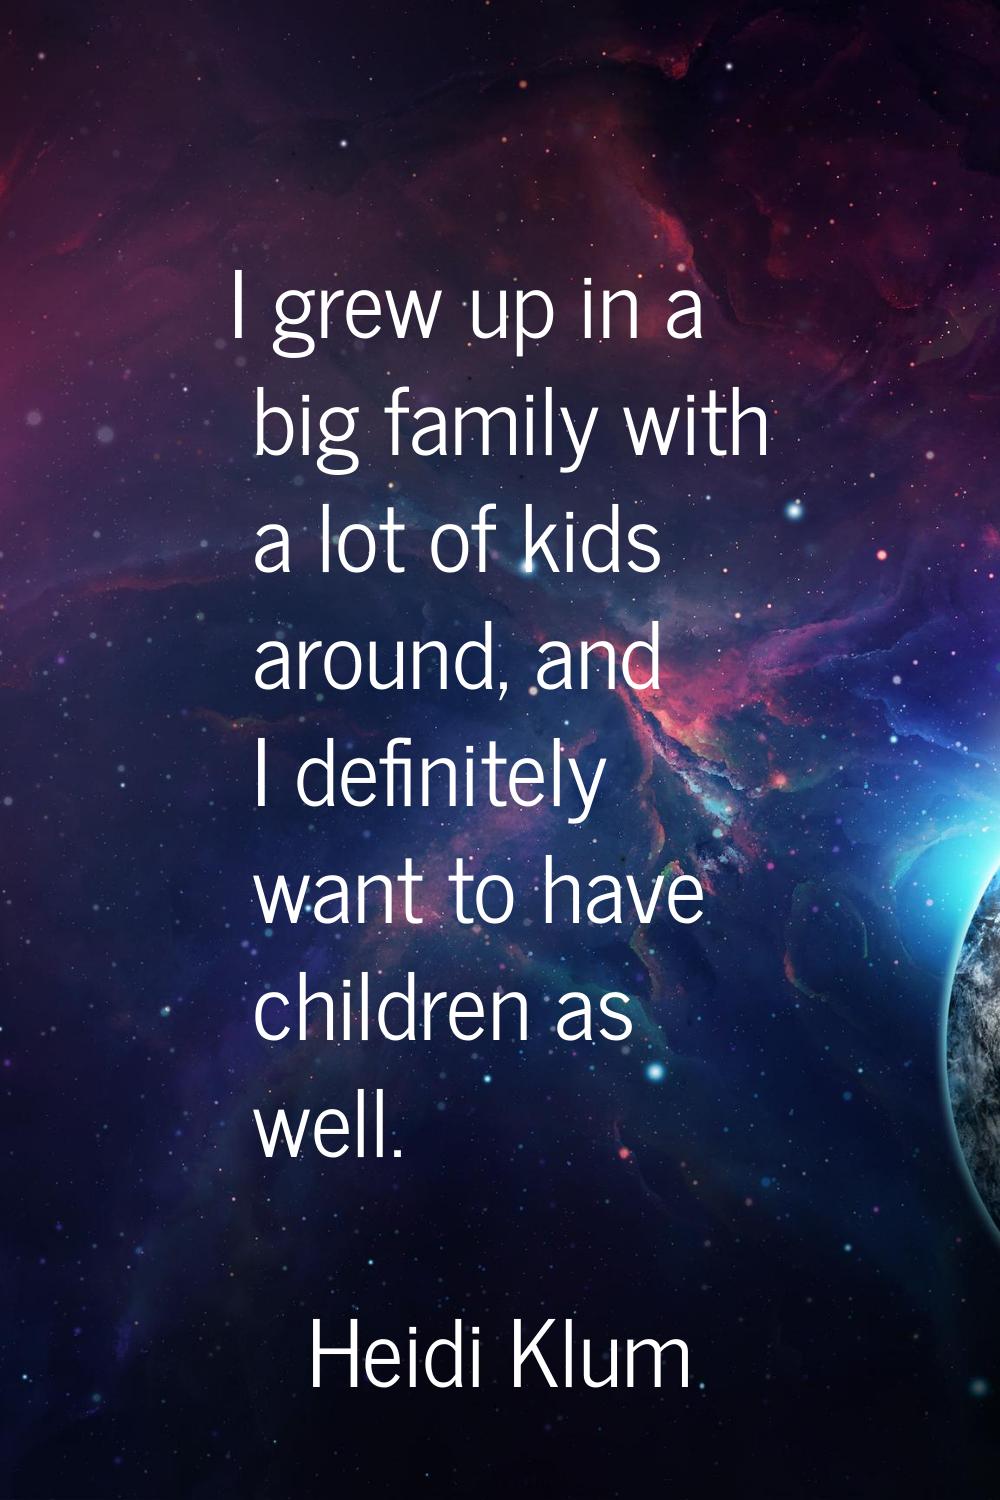 I grew up in a big family with a lot of kids around, and I definitely want to have children as well